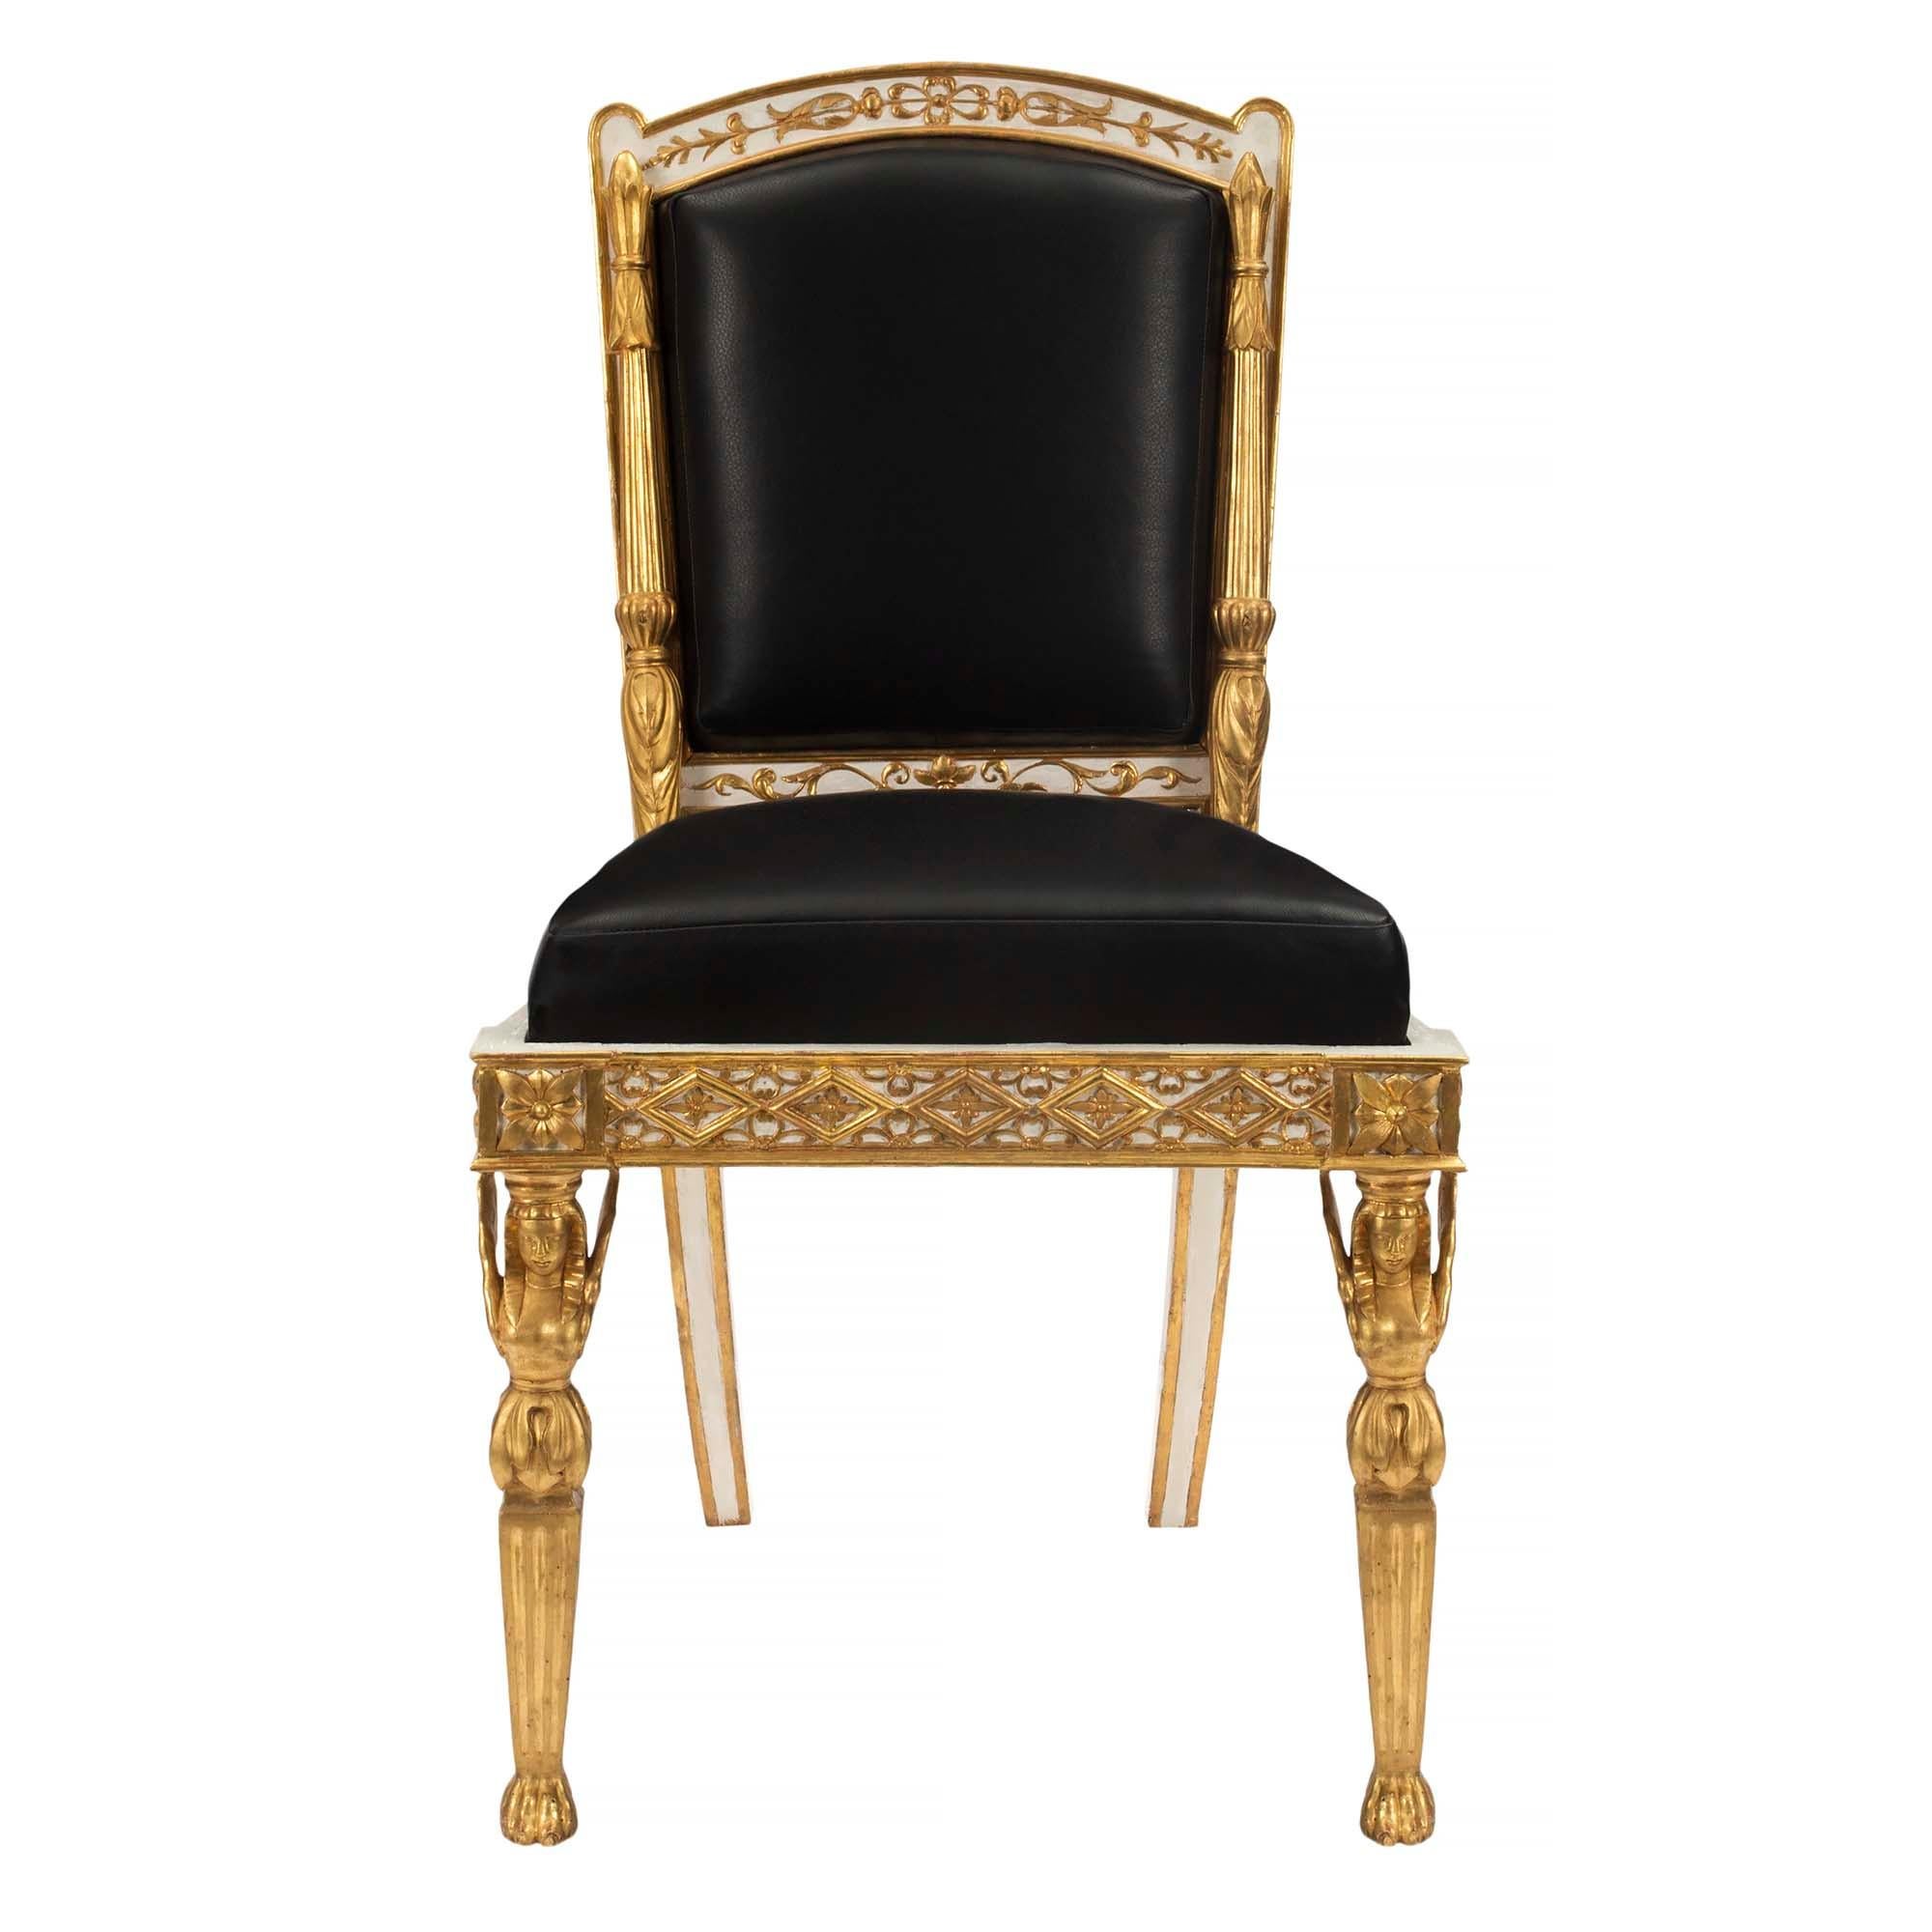 A spectacular and high quality complete set of twelve Italian 19th century Neo-Classical st. patinated and giltwood dining chairs. Each chair is raised by handsome giltwood paw feet below square tapered fluted legs and stunning richly detailed